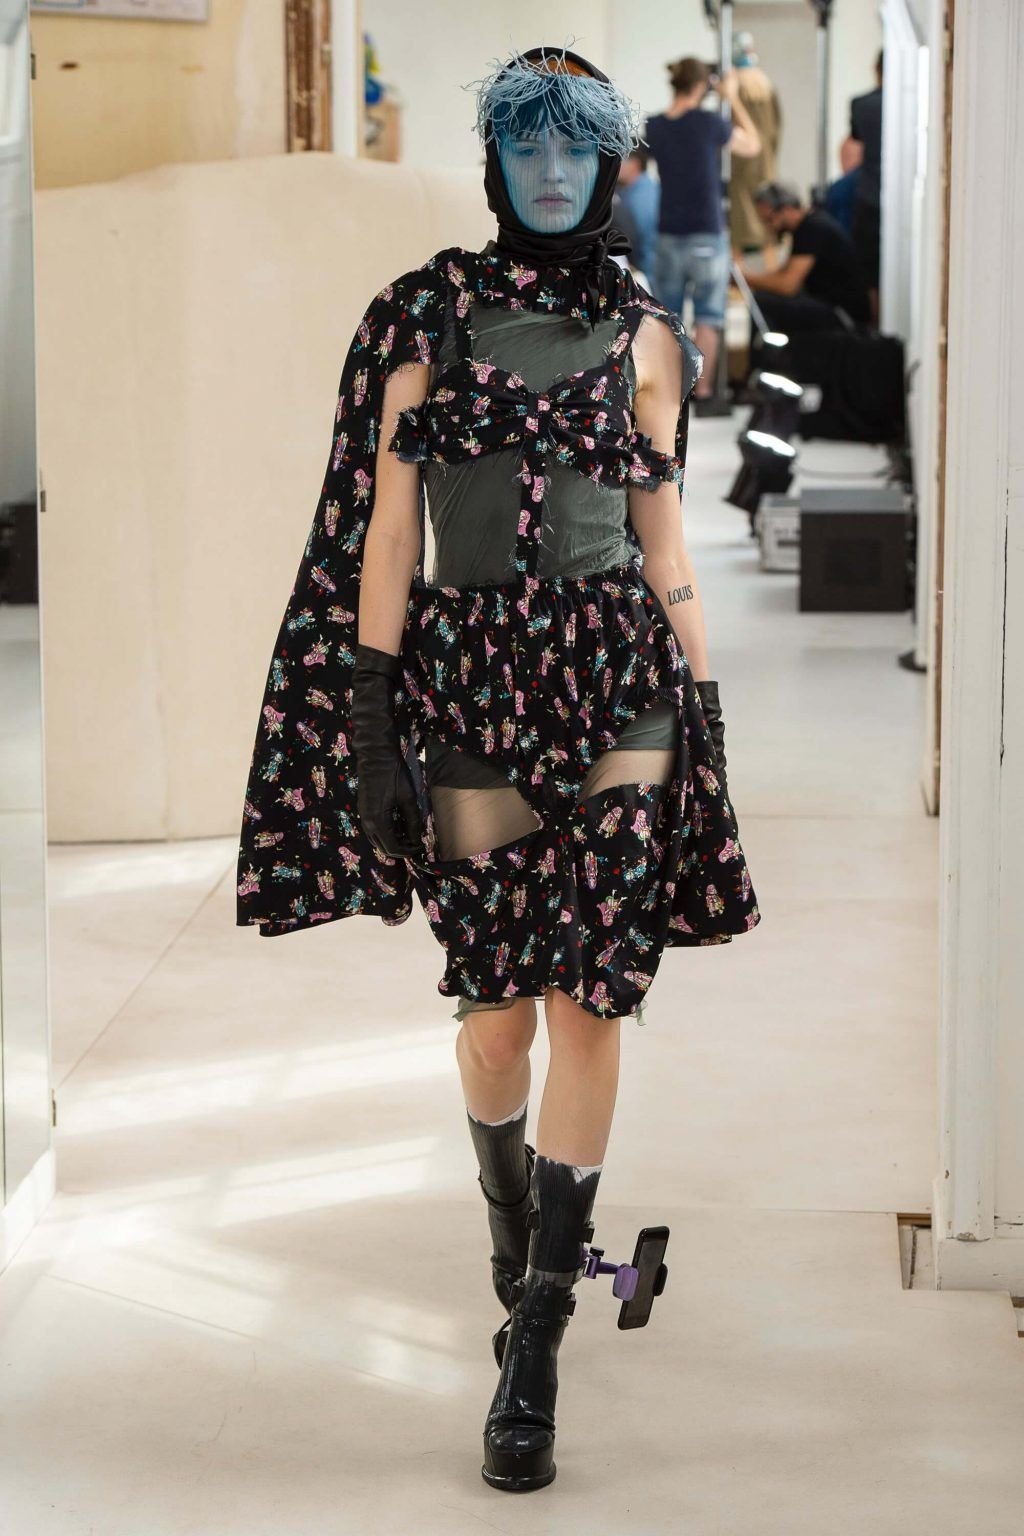 Leg accessories and phone holders caused a stir on the Maison Margiela catwalk